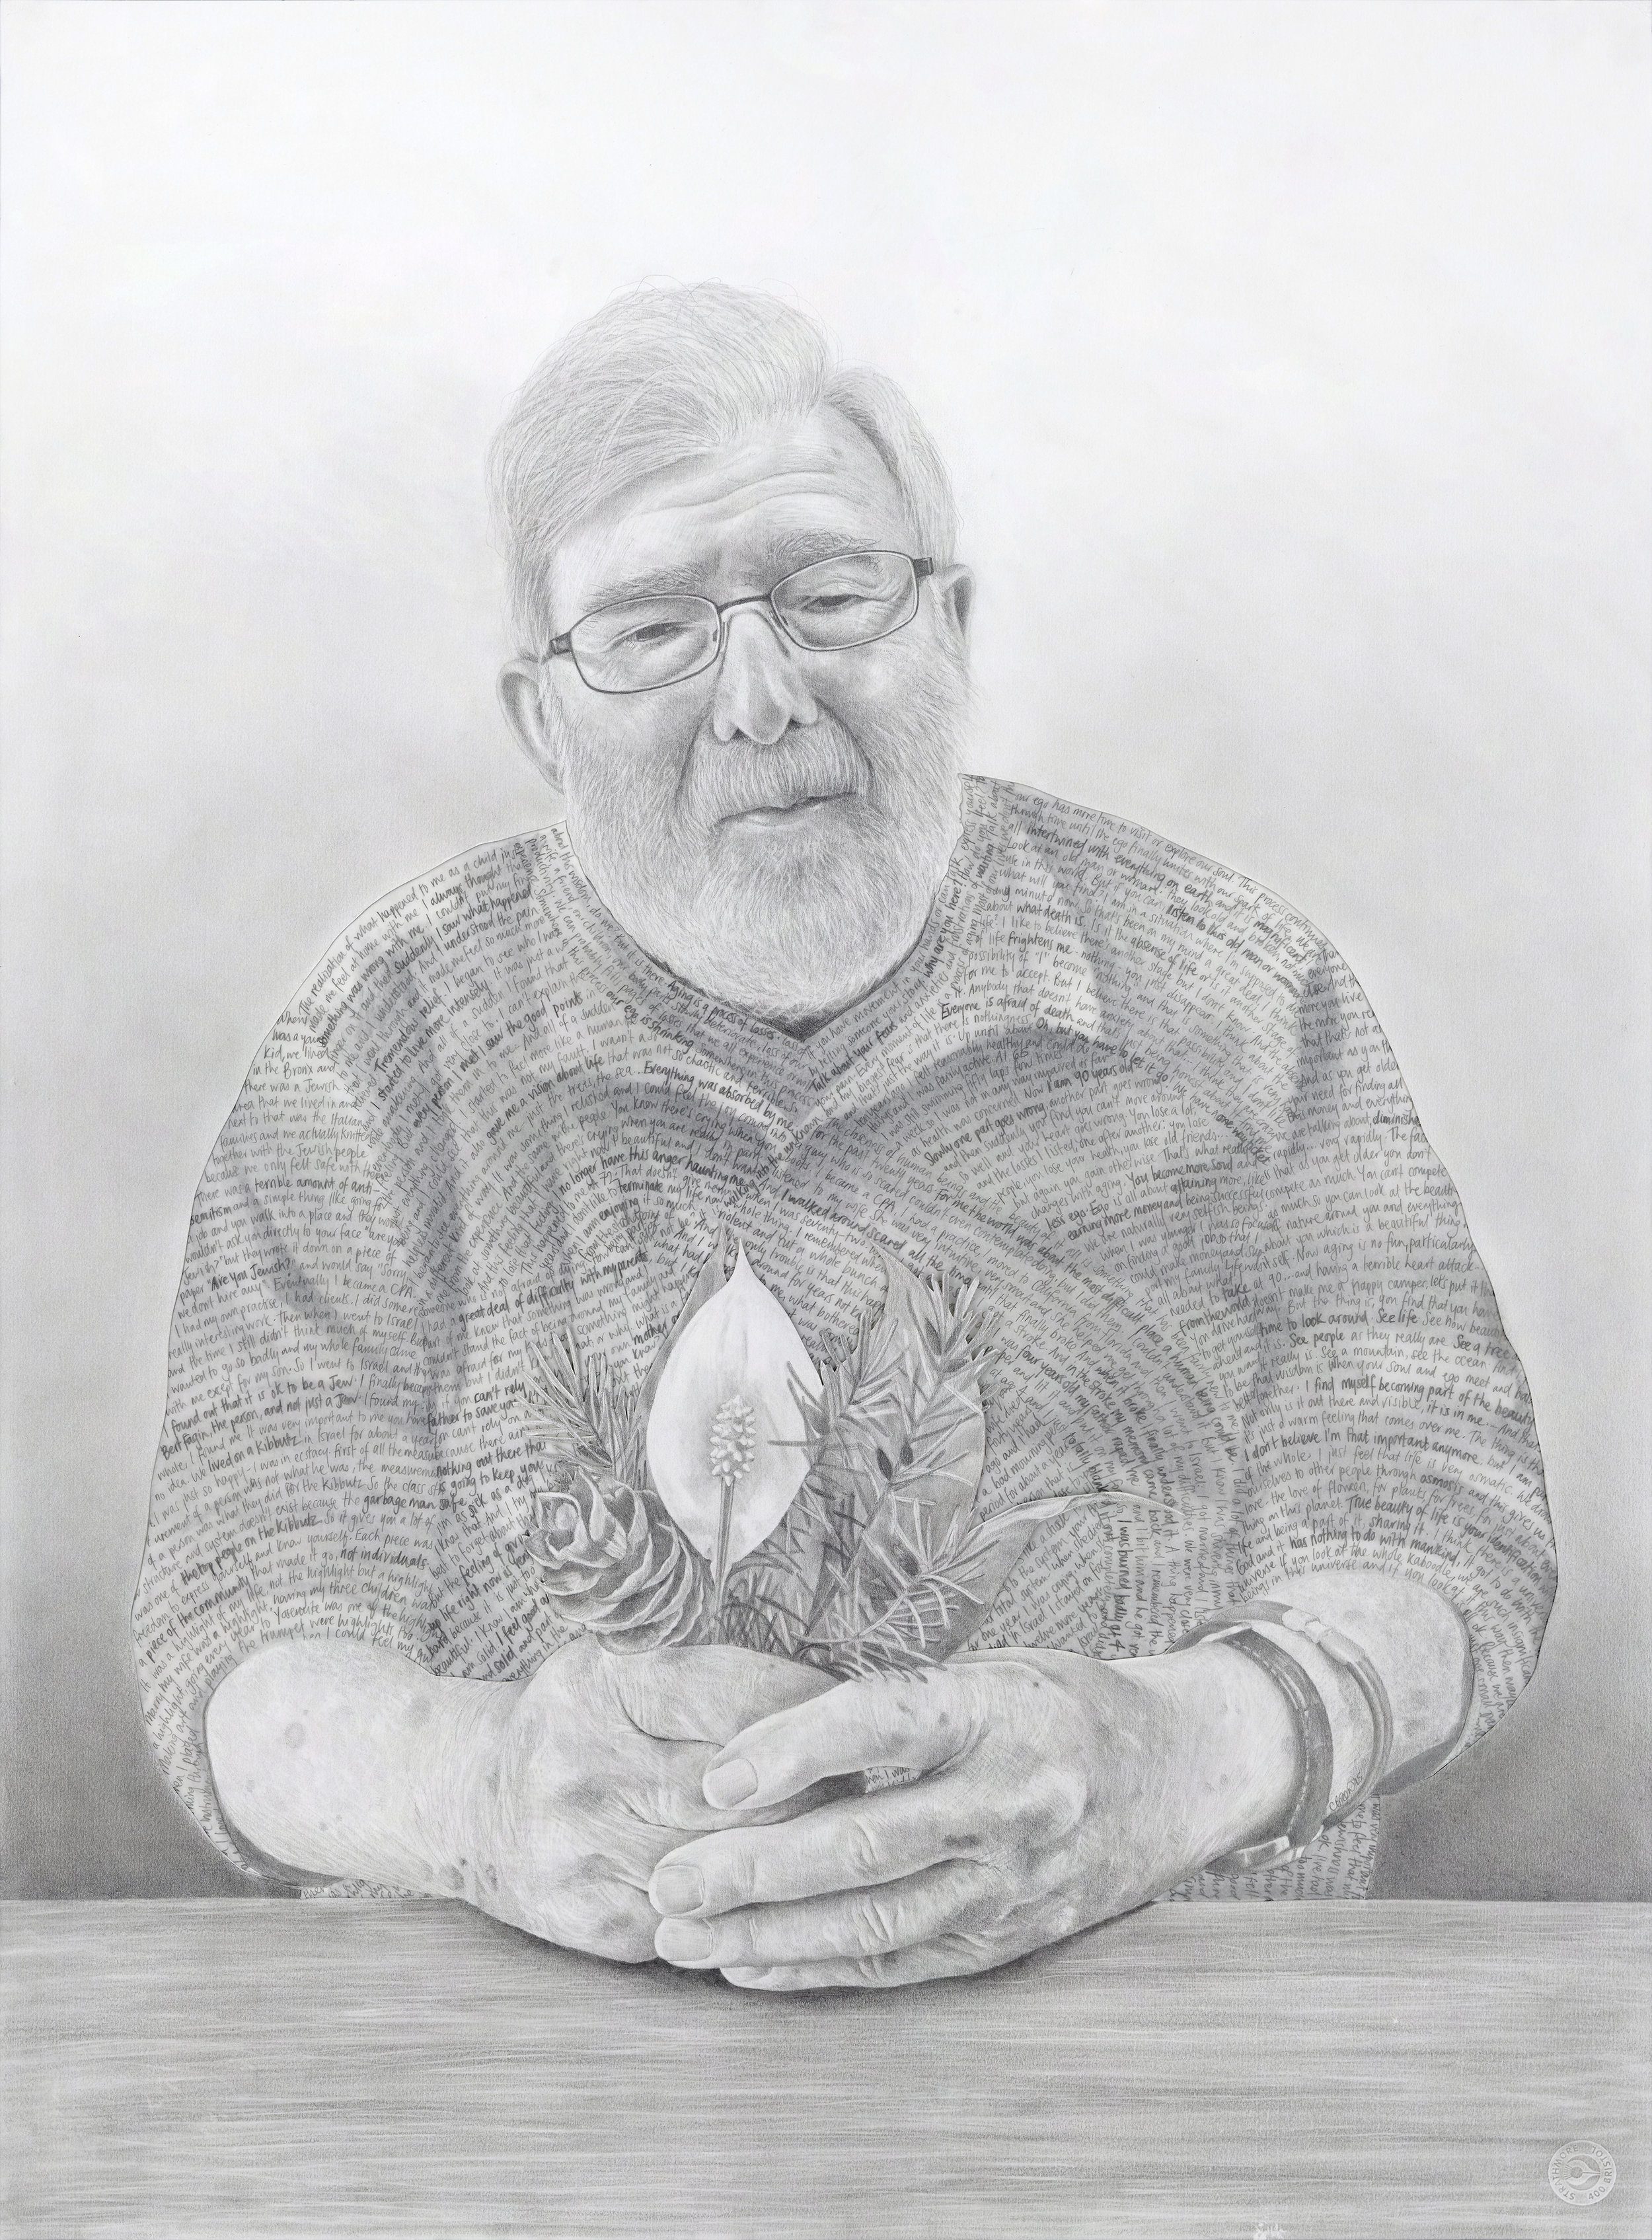 Bert - Pencil on drawing and tissue papers - 30" x 22" - 2015